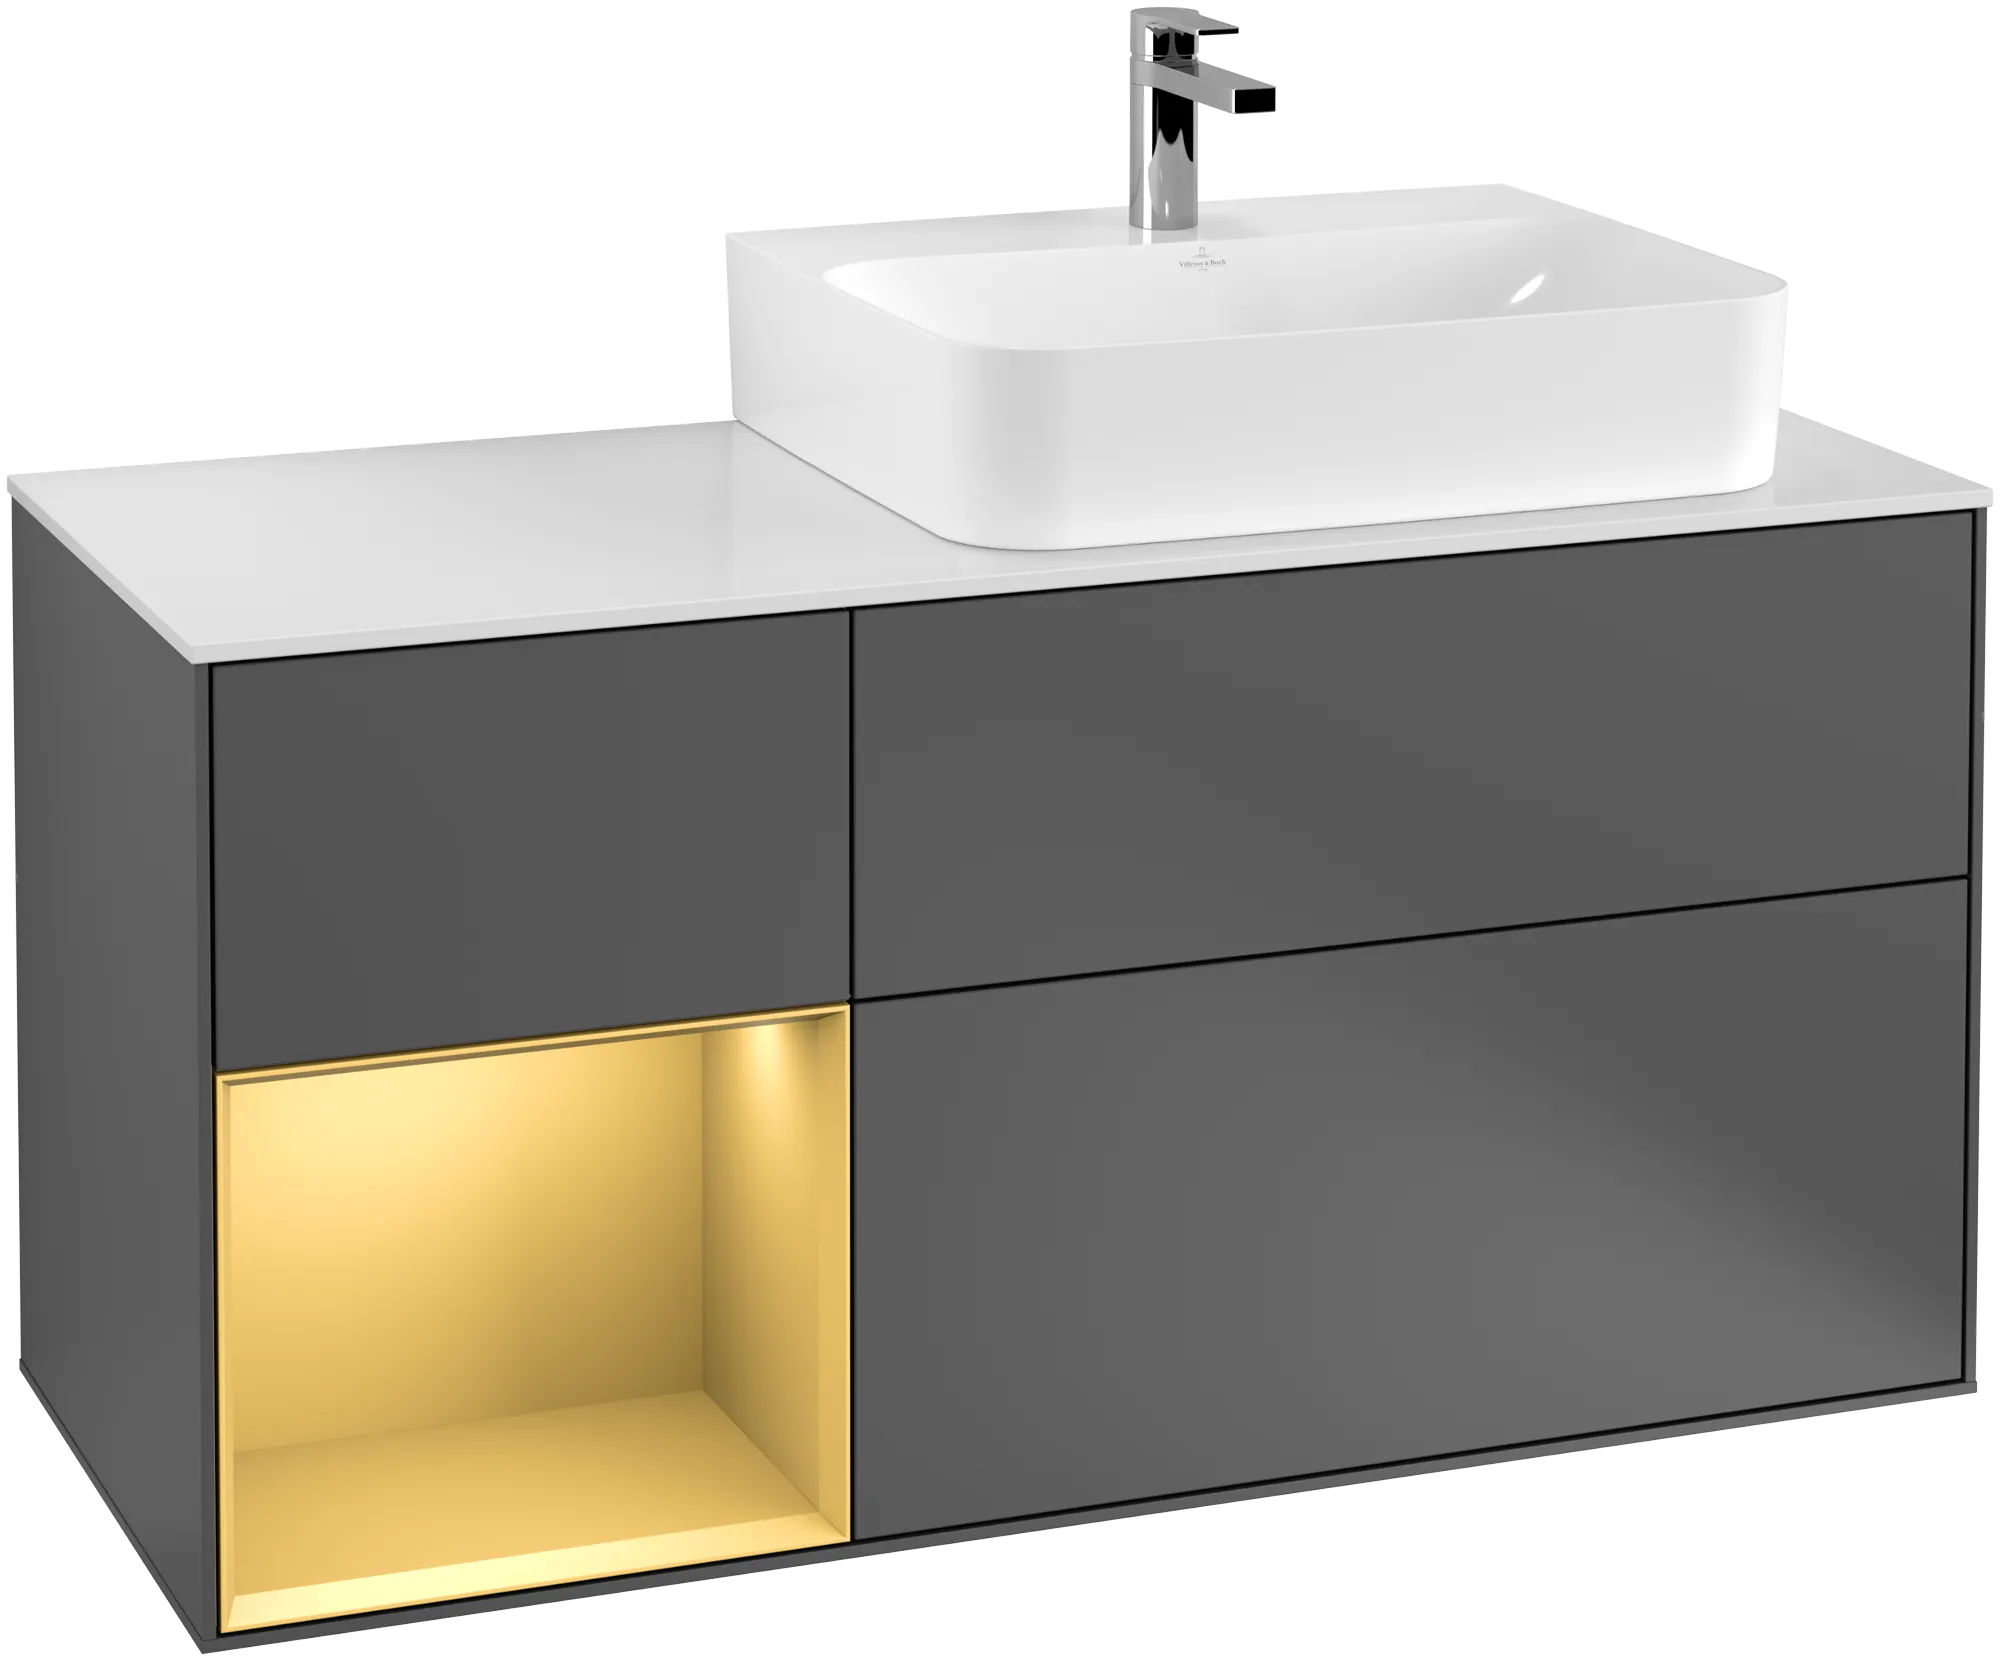 Picture of VILLEROY BOCH Finion Vanity unit, with lighting, 3 pull-out compartments, 1200 x 603 x 501 mm, Anthracite Matt Lacquer / Gold Matt Lacquer / Glass White Matt #G141HFGK